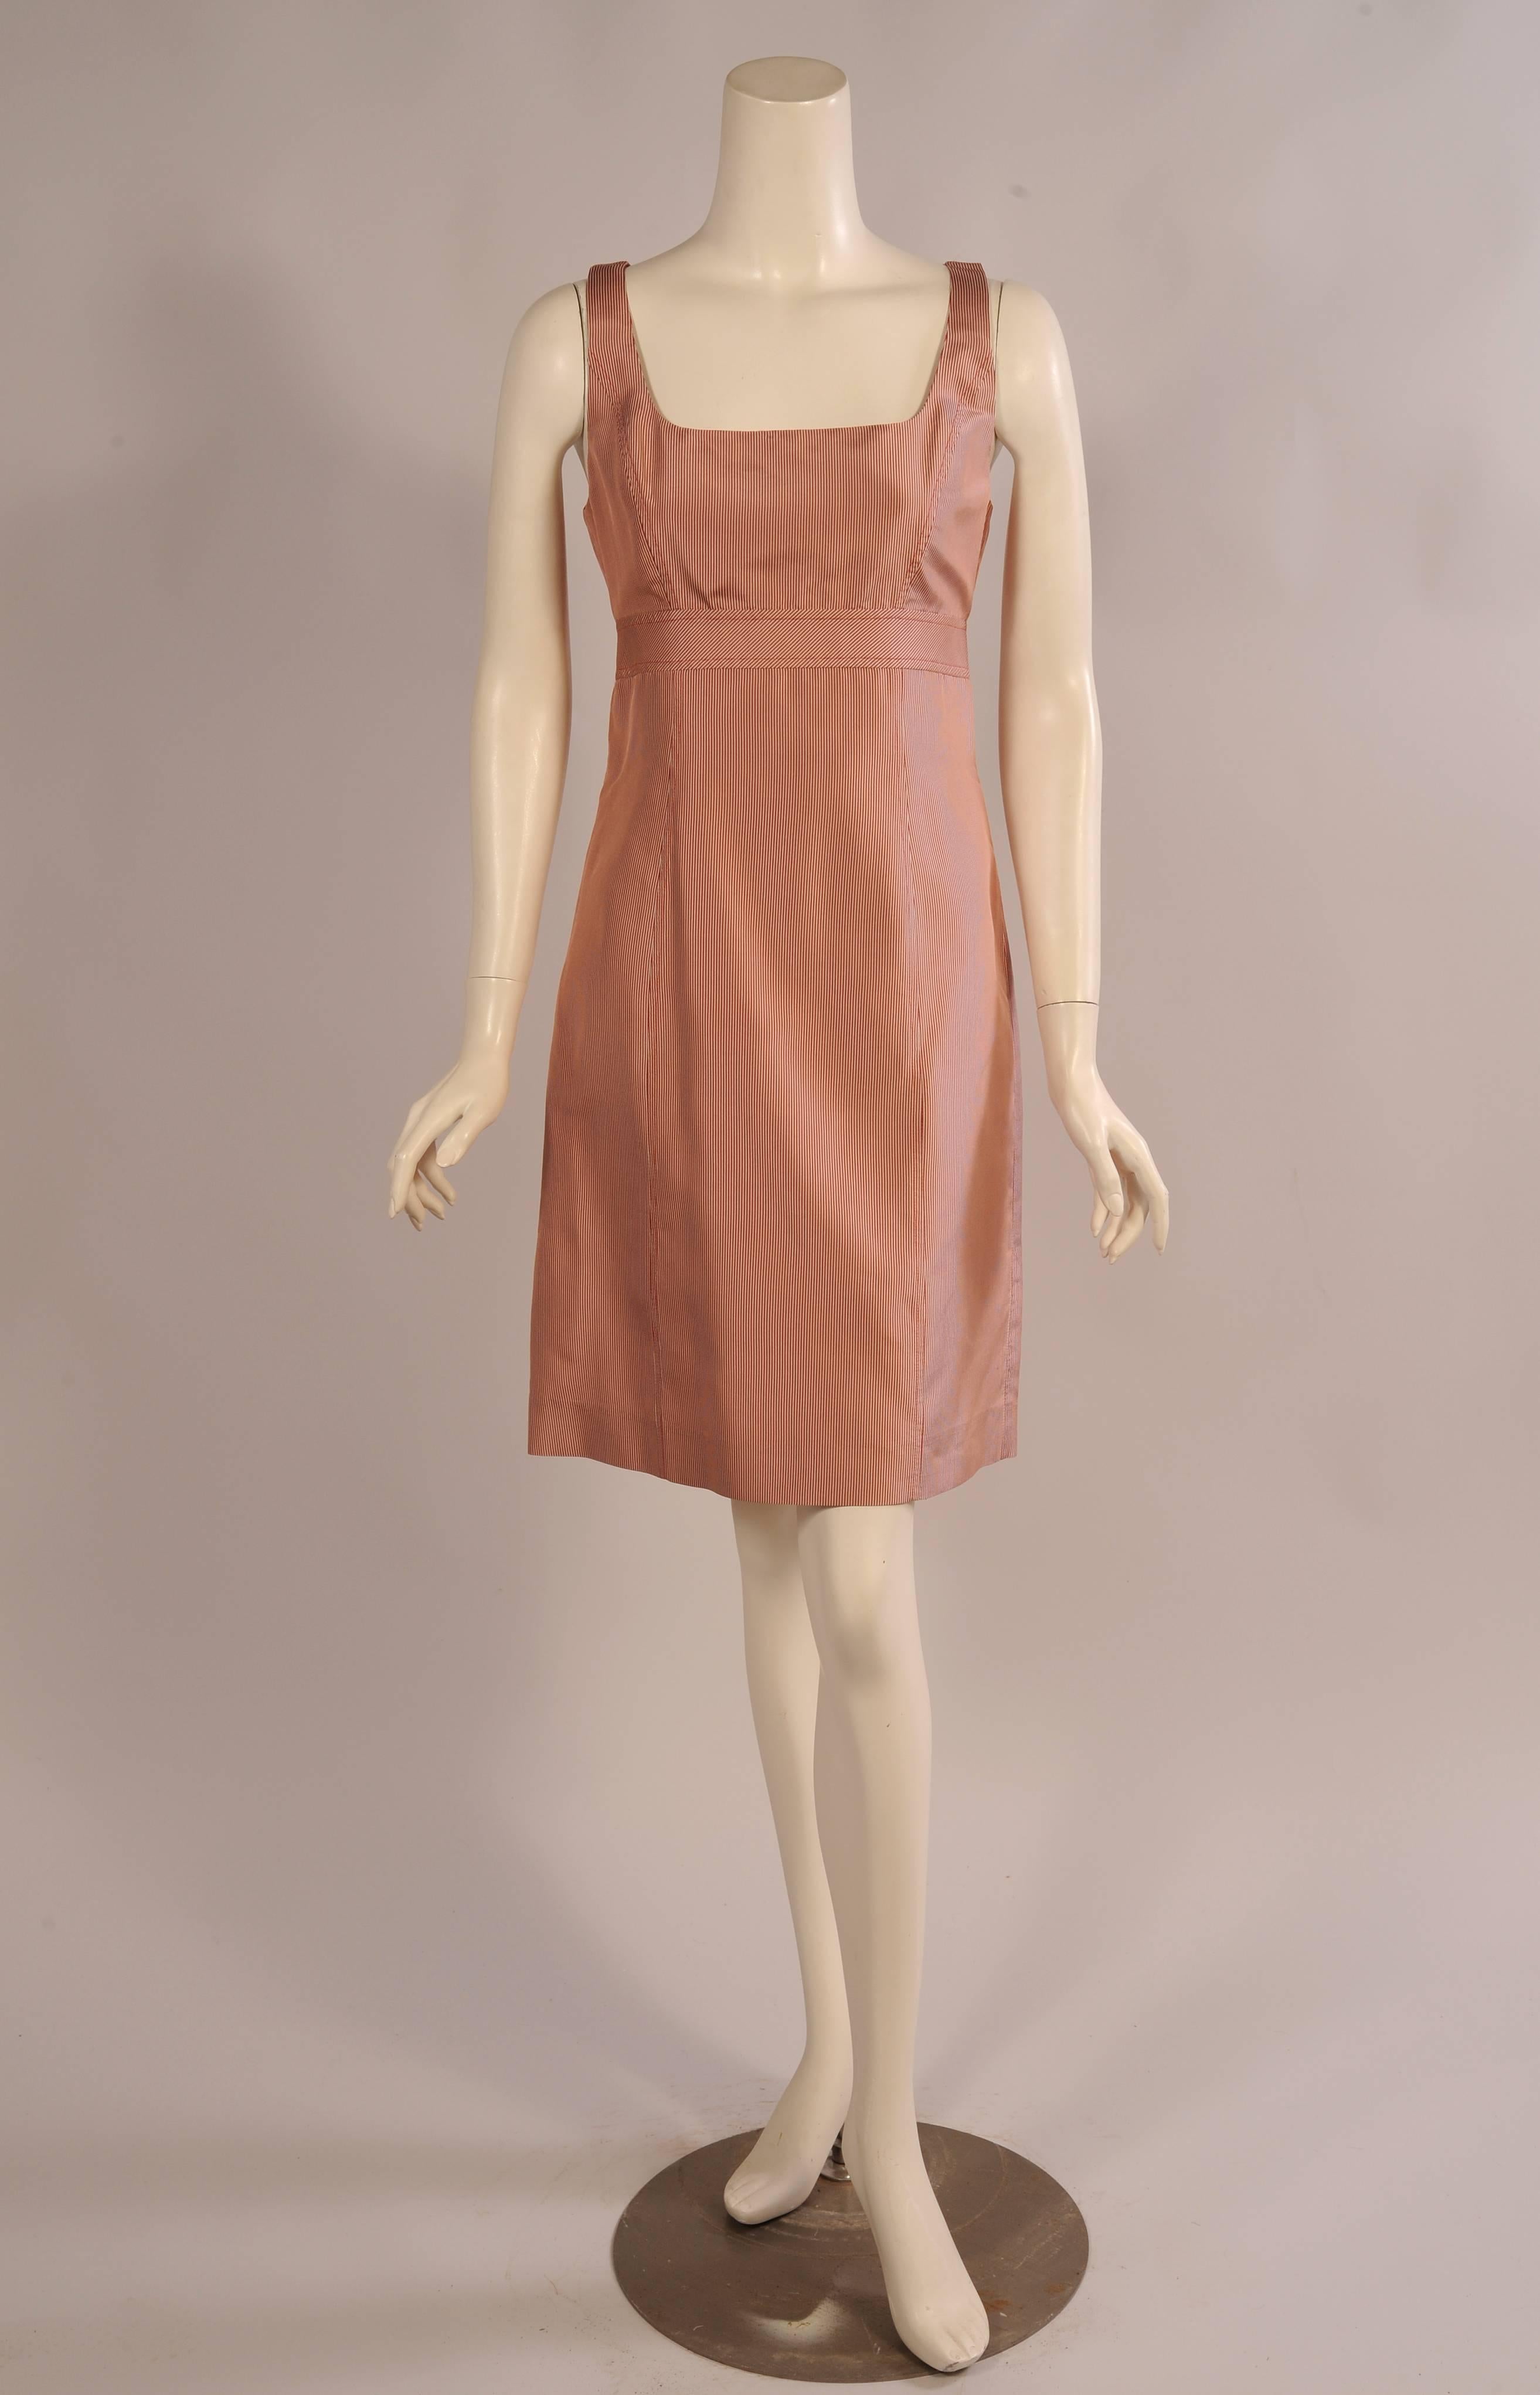 This sleeveless dress with a flattering scoop neckline has a raised Empire style waist band. It is defined by a wide flat band with the stripes running on the diagonal. The dress has a center back zipper, is fully lined and in excellent condition.